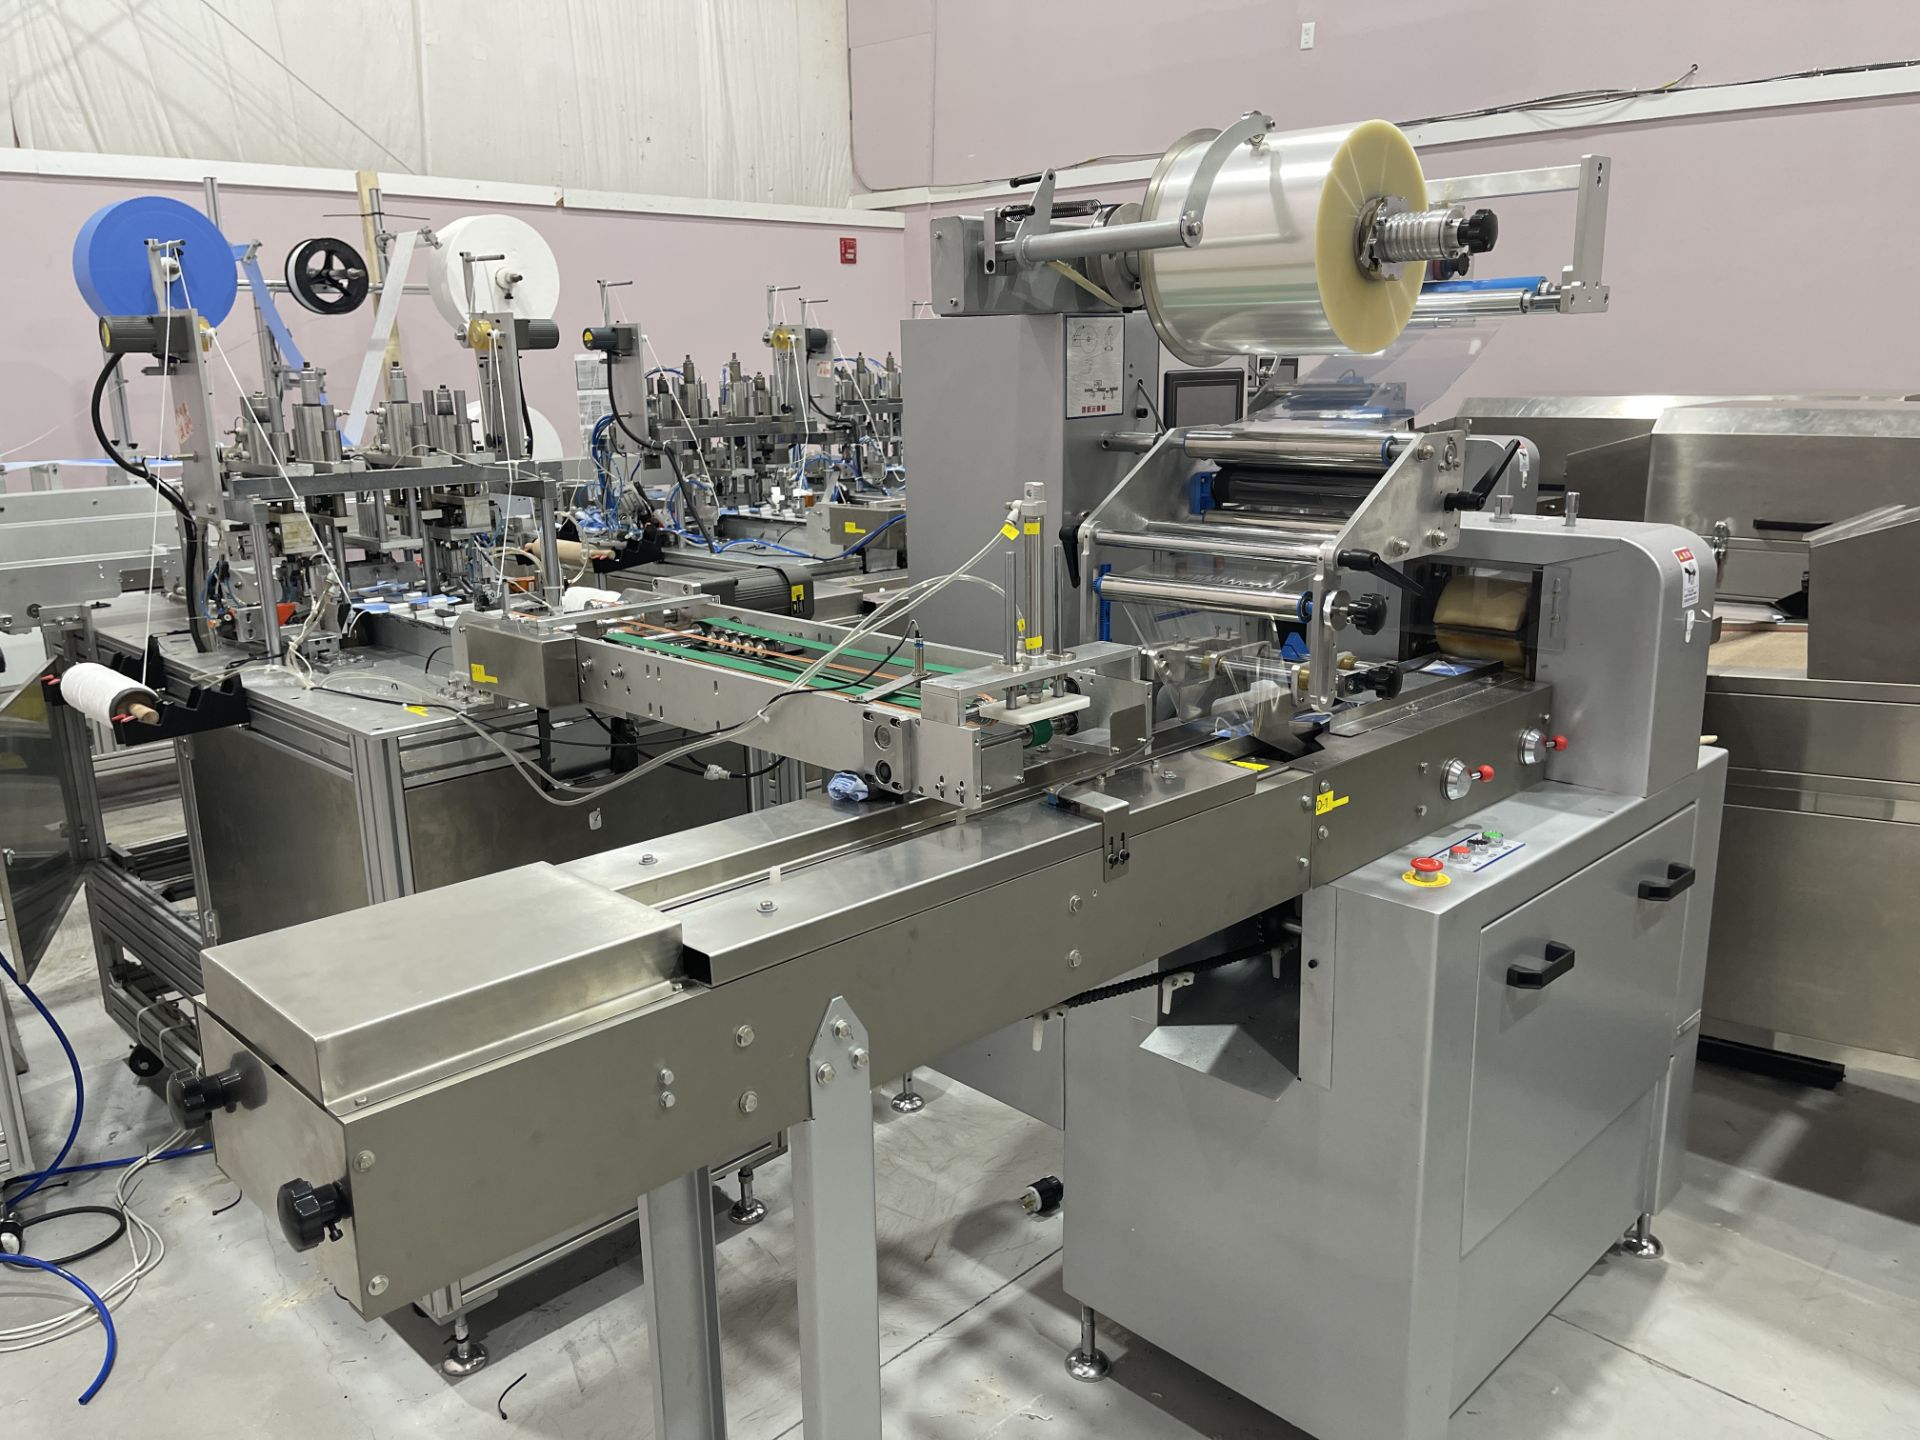 COMPLETE PACKAGE: 2020 3-Ply Disposable Medical Mask Assembly & Packaging Line Equipment, Includes: - Image 90 of 150